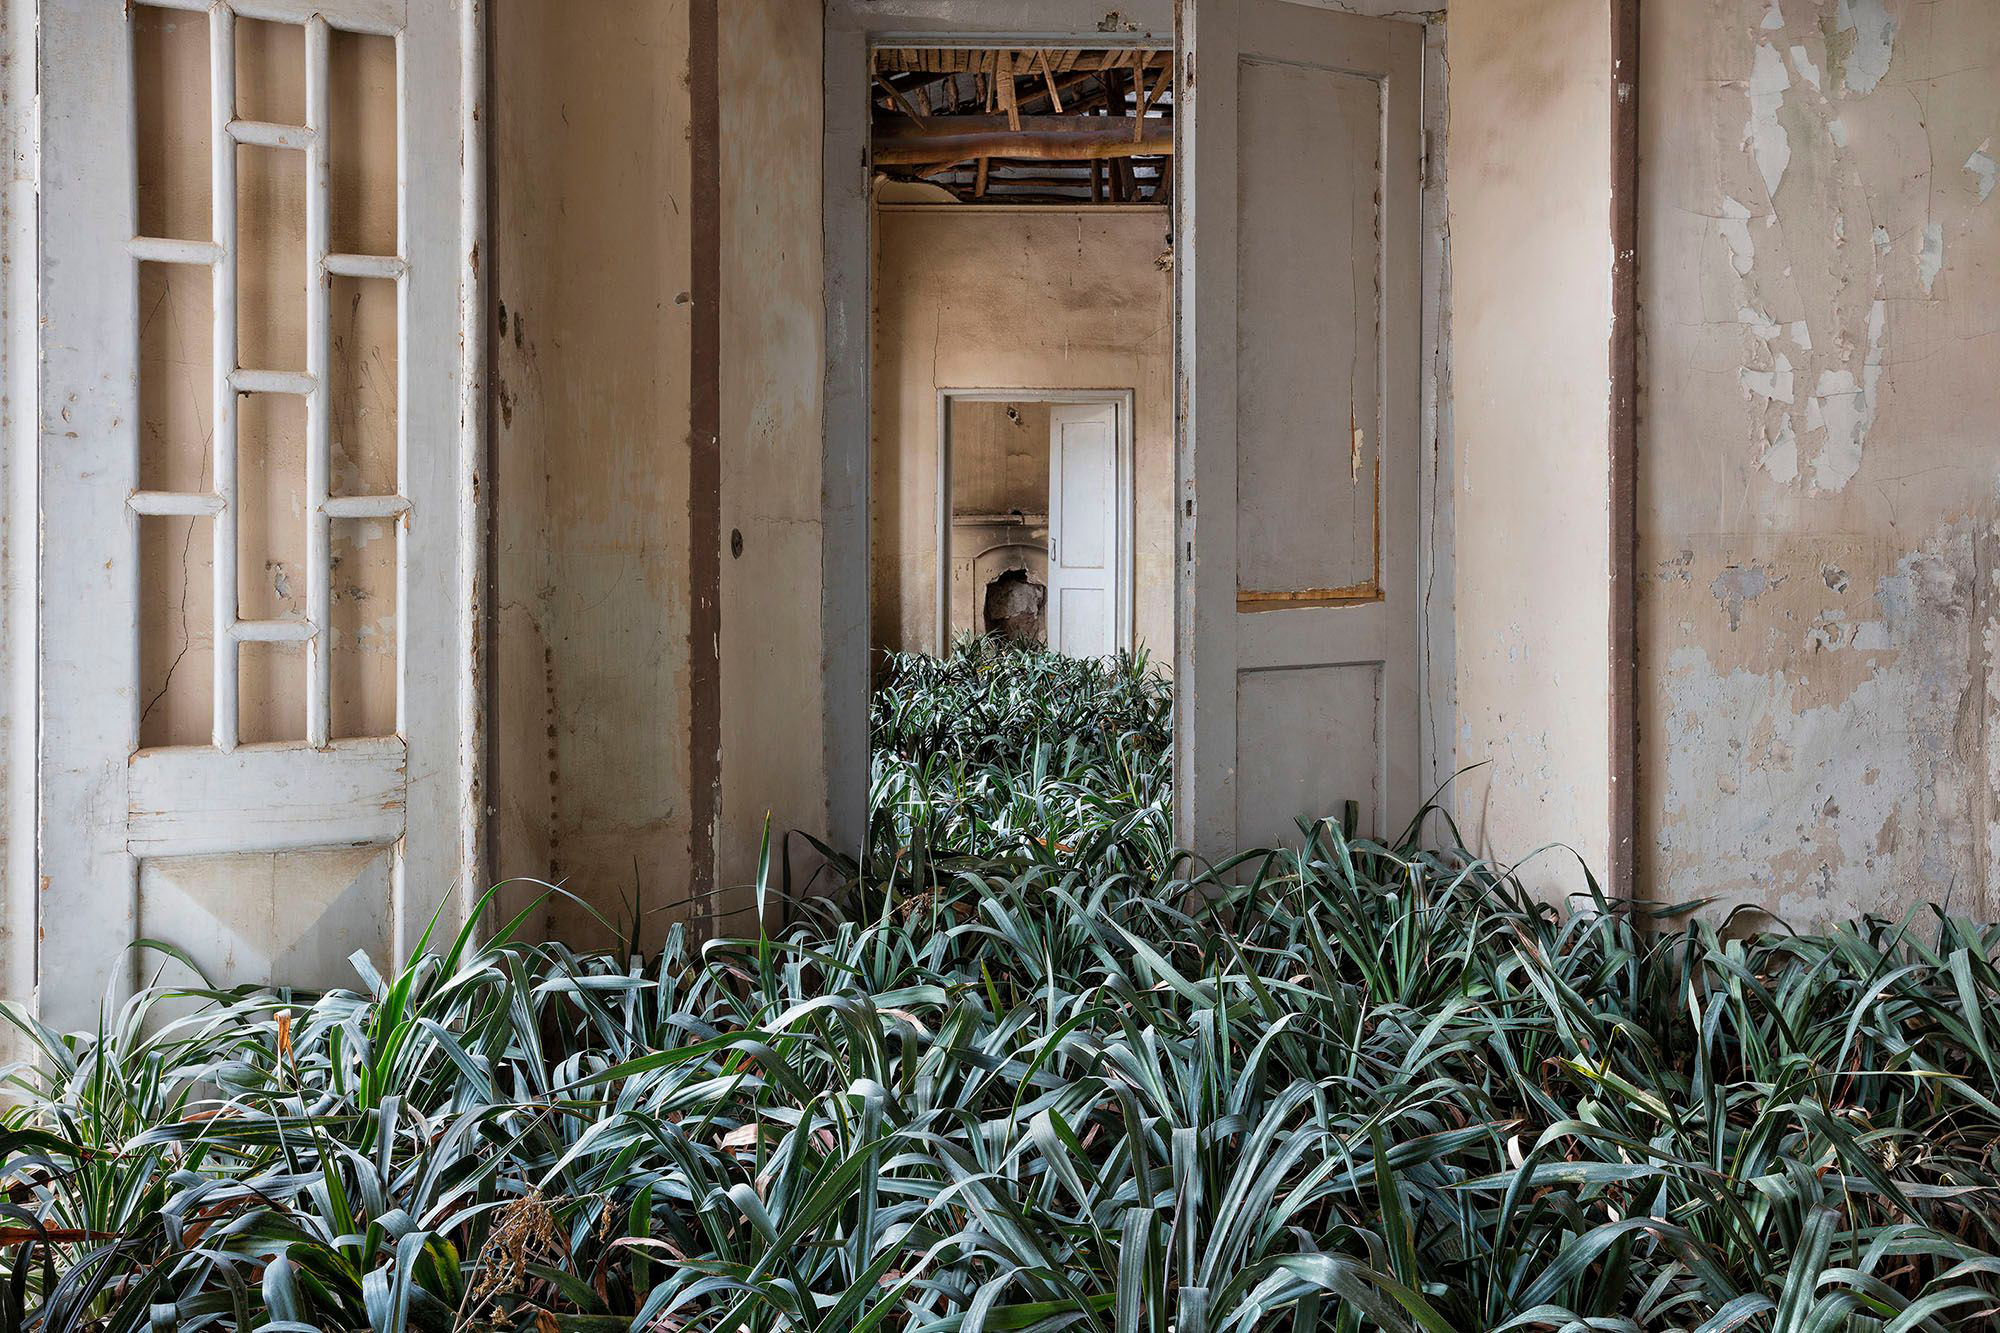 Nature Thrives in Tehran’s Abandoned Courtyards, Staircases, and Bedrooms in a Photo Series by Gohar Dashti